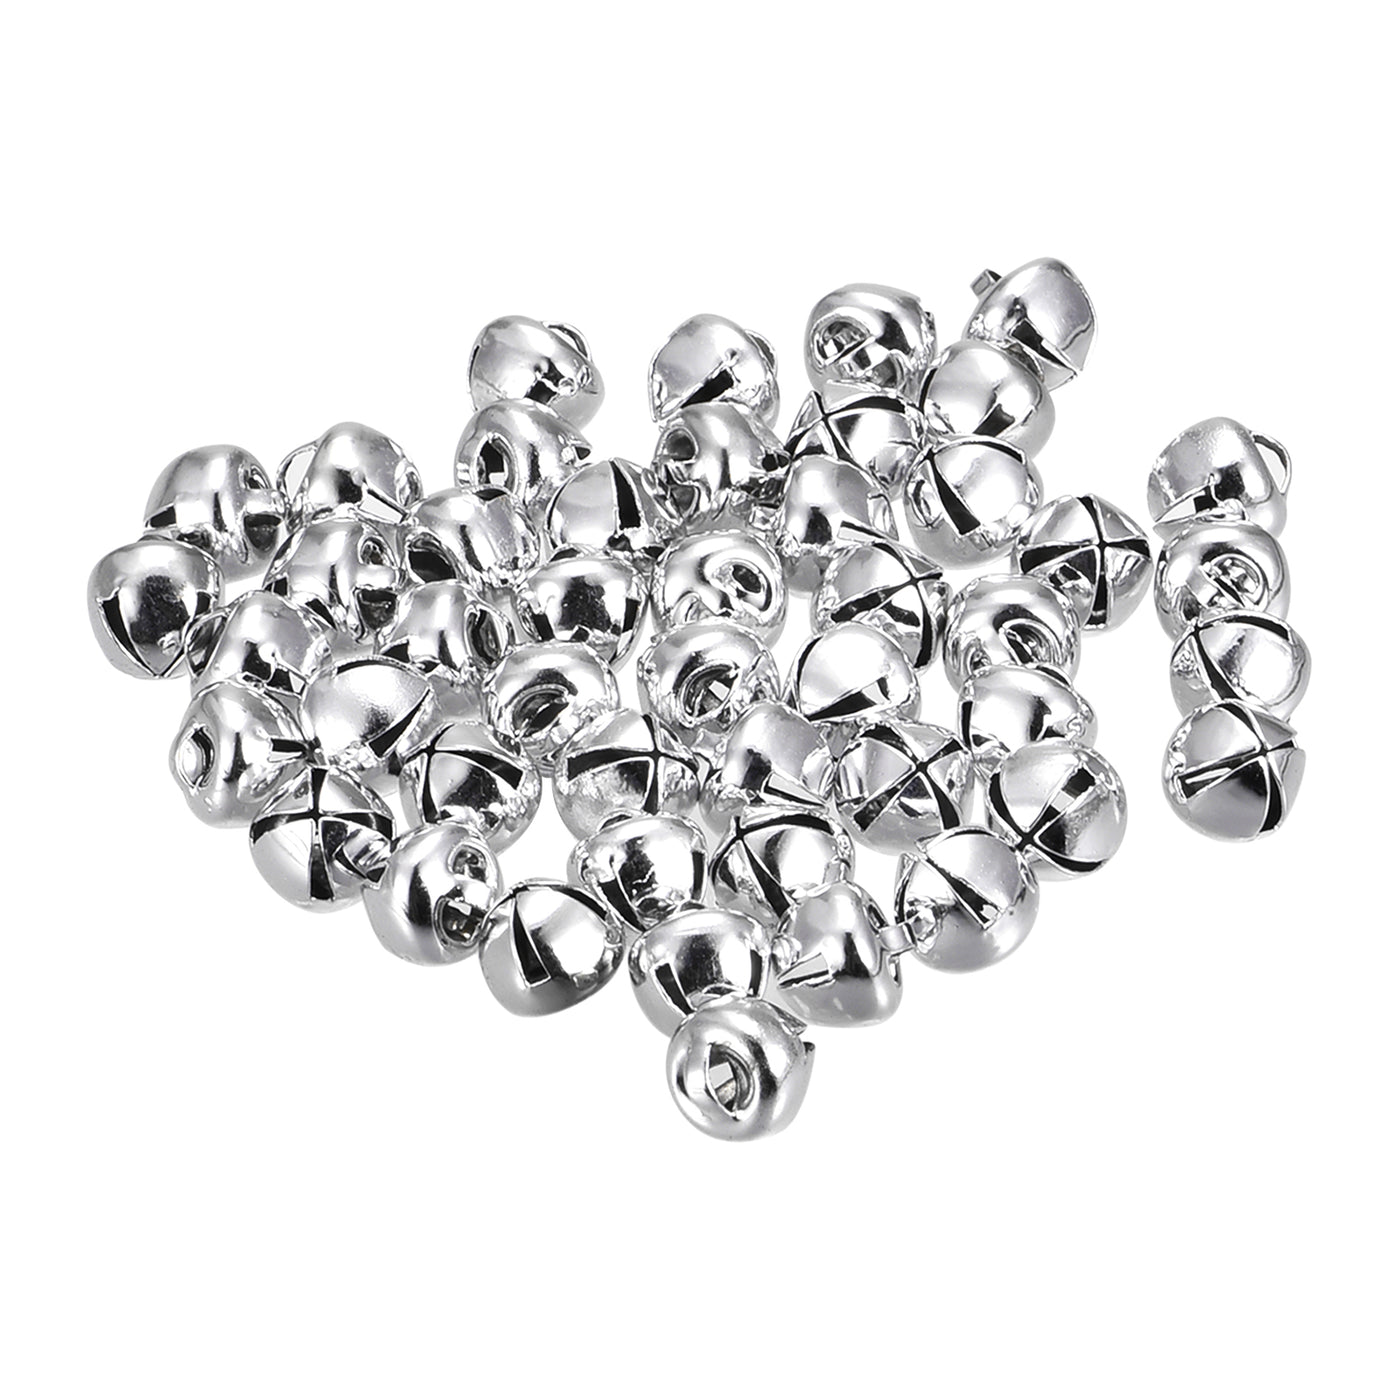 uxcell Uxcell Jingle Bells, 8mm 120pcs Small Bells for Crafts DIY Christmas, Silver Tone